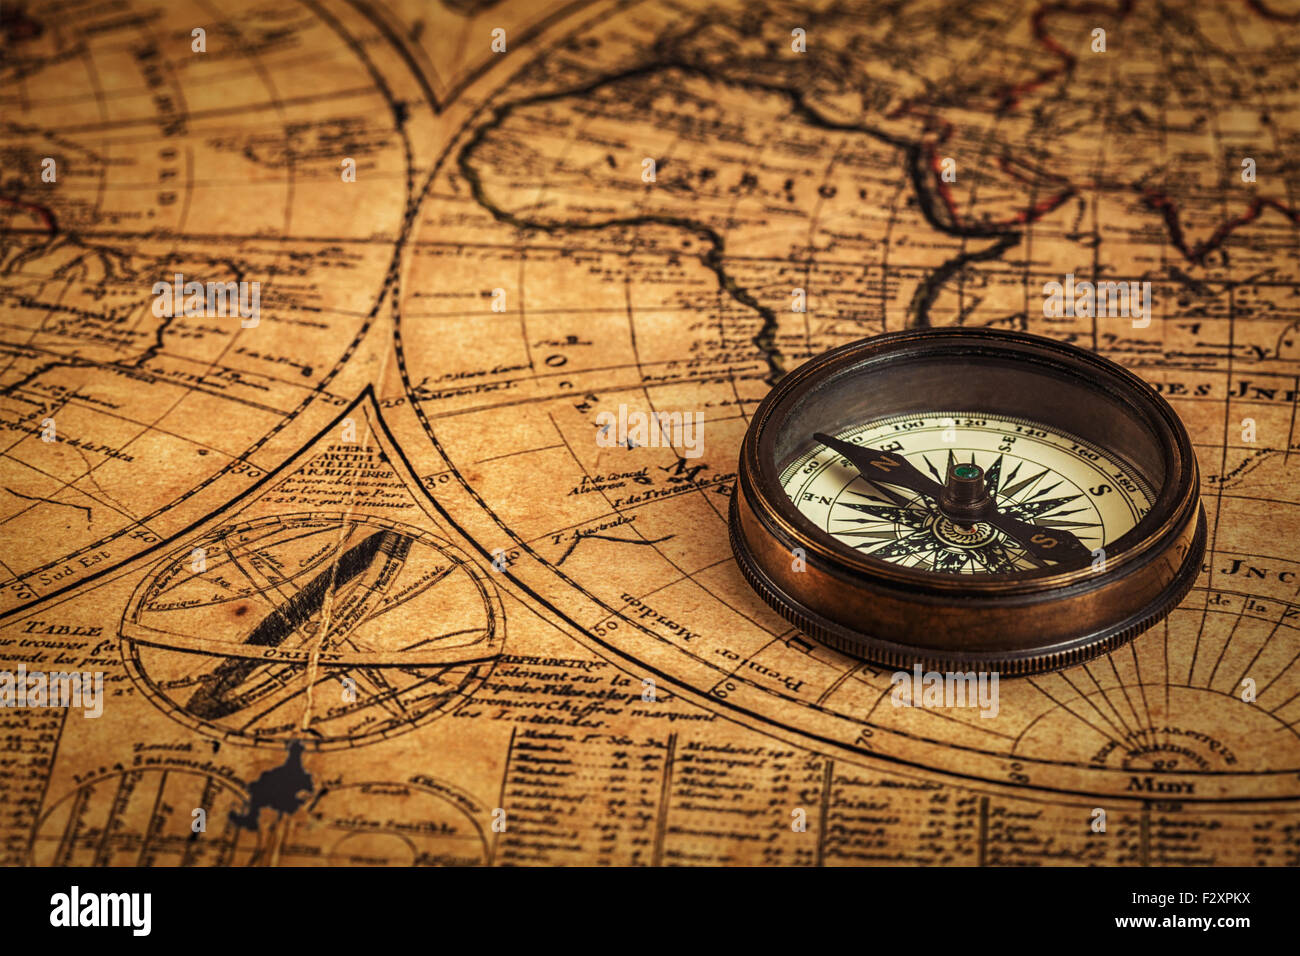 Compass And Chess On Old Map Stock Photo, Picture and Royalty Free Image.  Image 41531877.